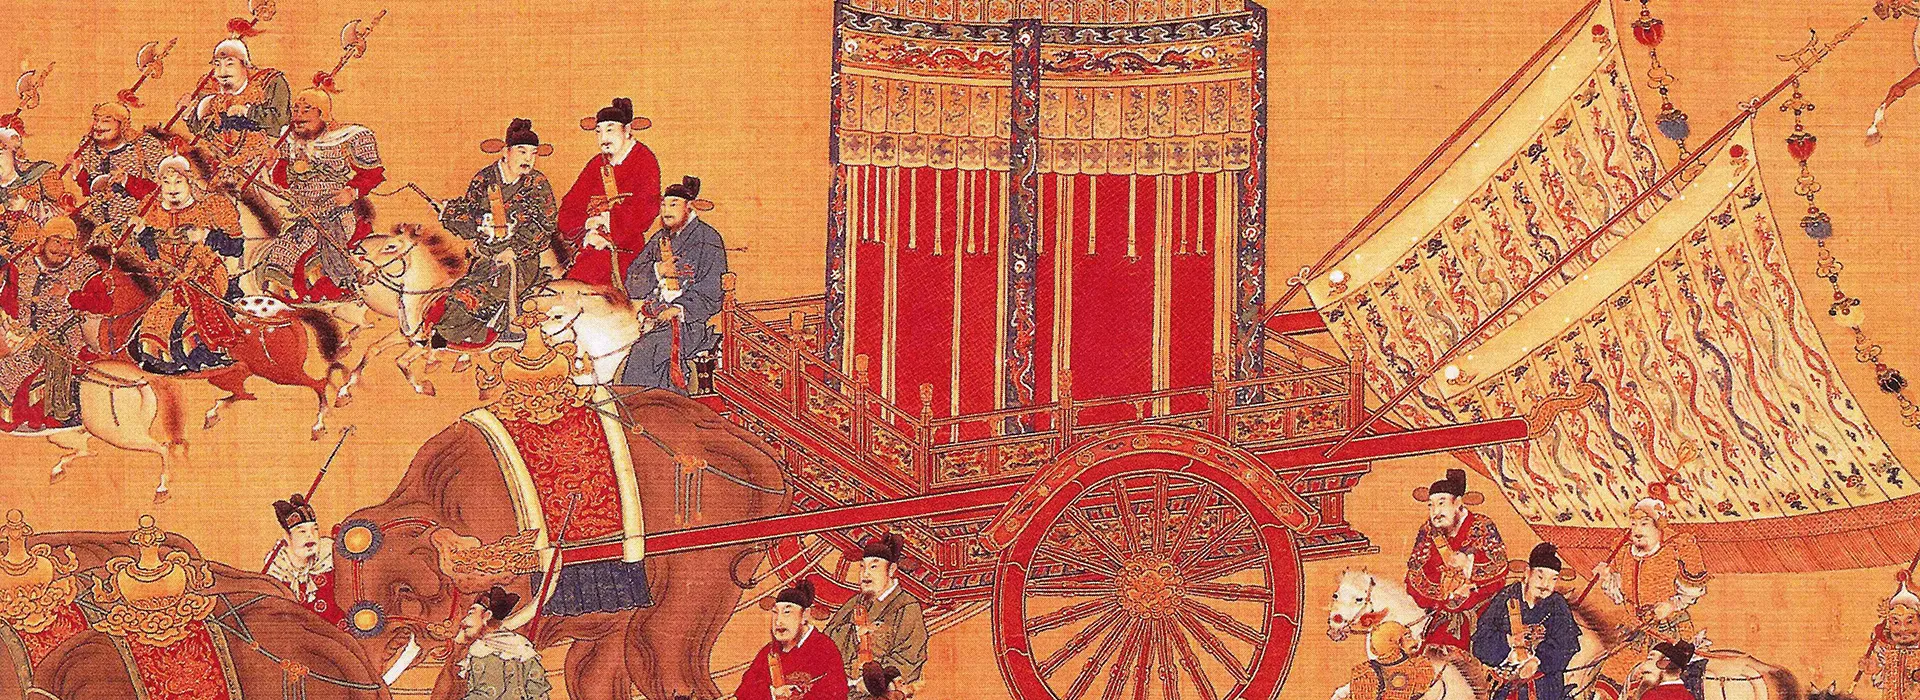 The Dark World in the Founding of the Ming Dynasty